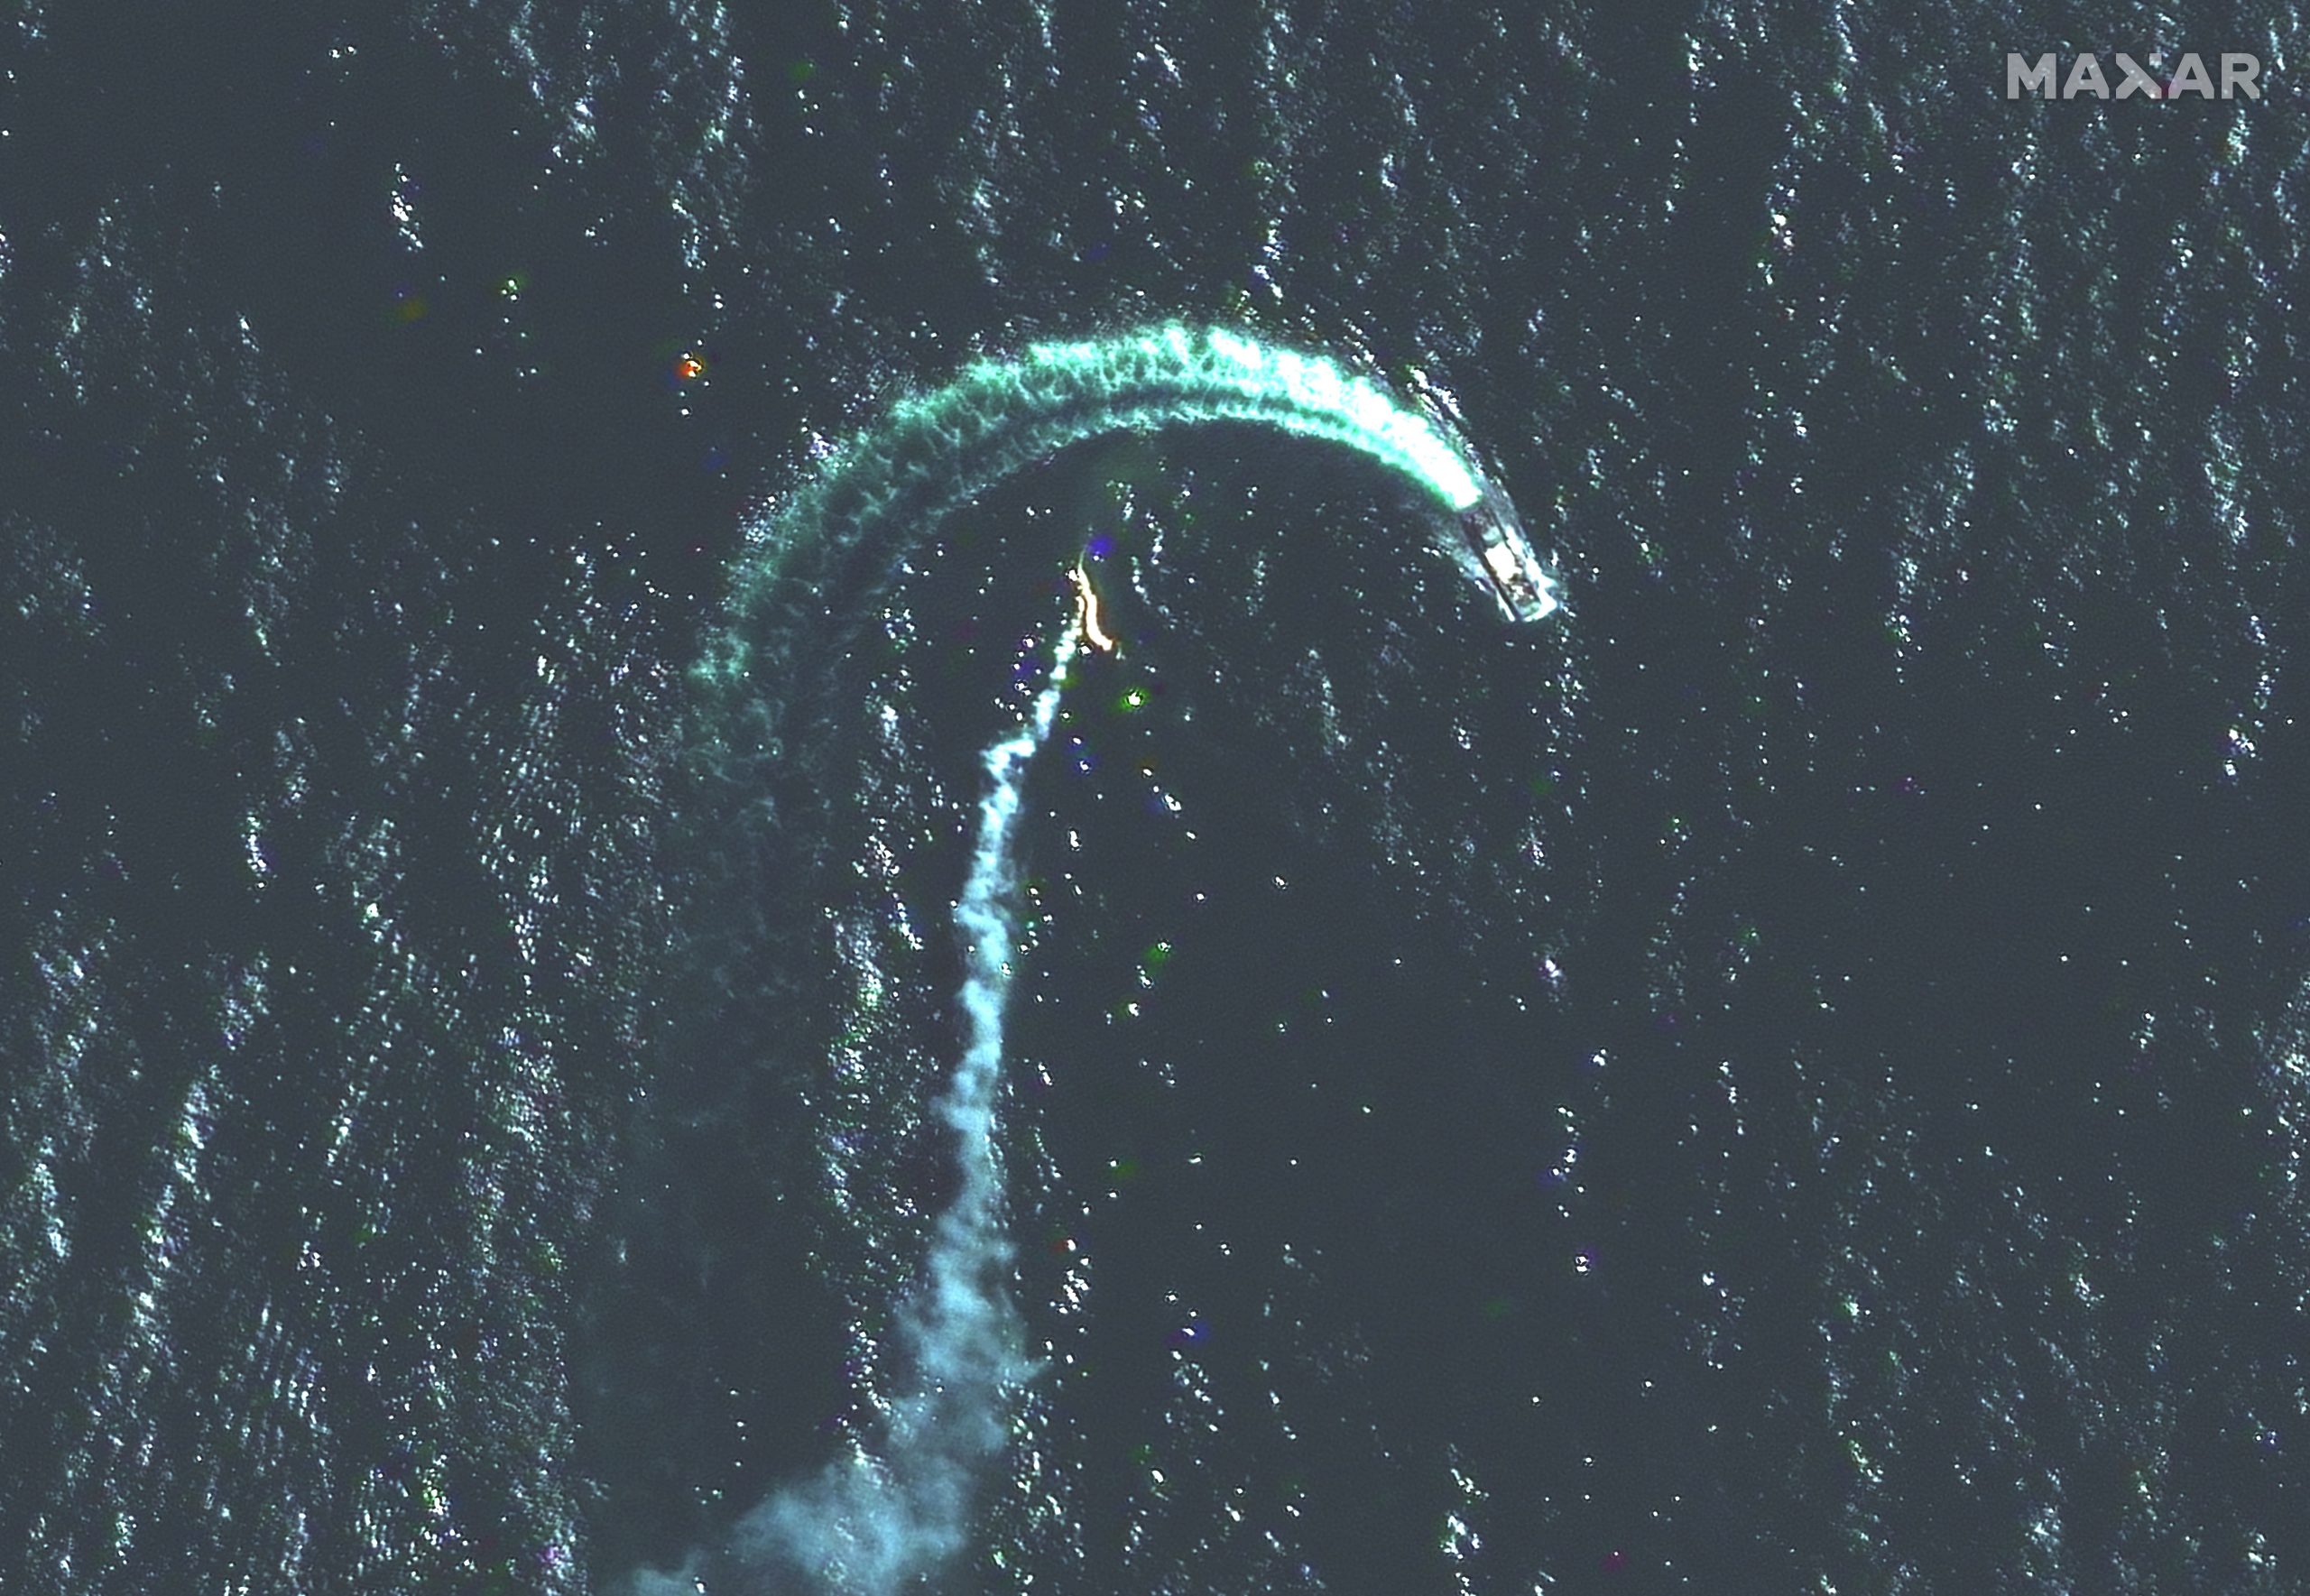 A Russian Serna-class landing ship and a possible missile contrail are seen in the water.